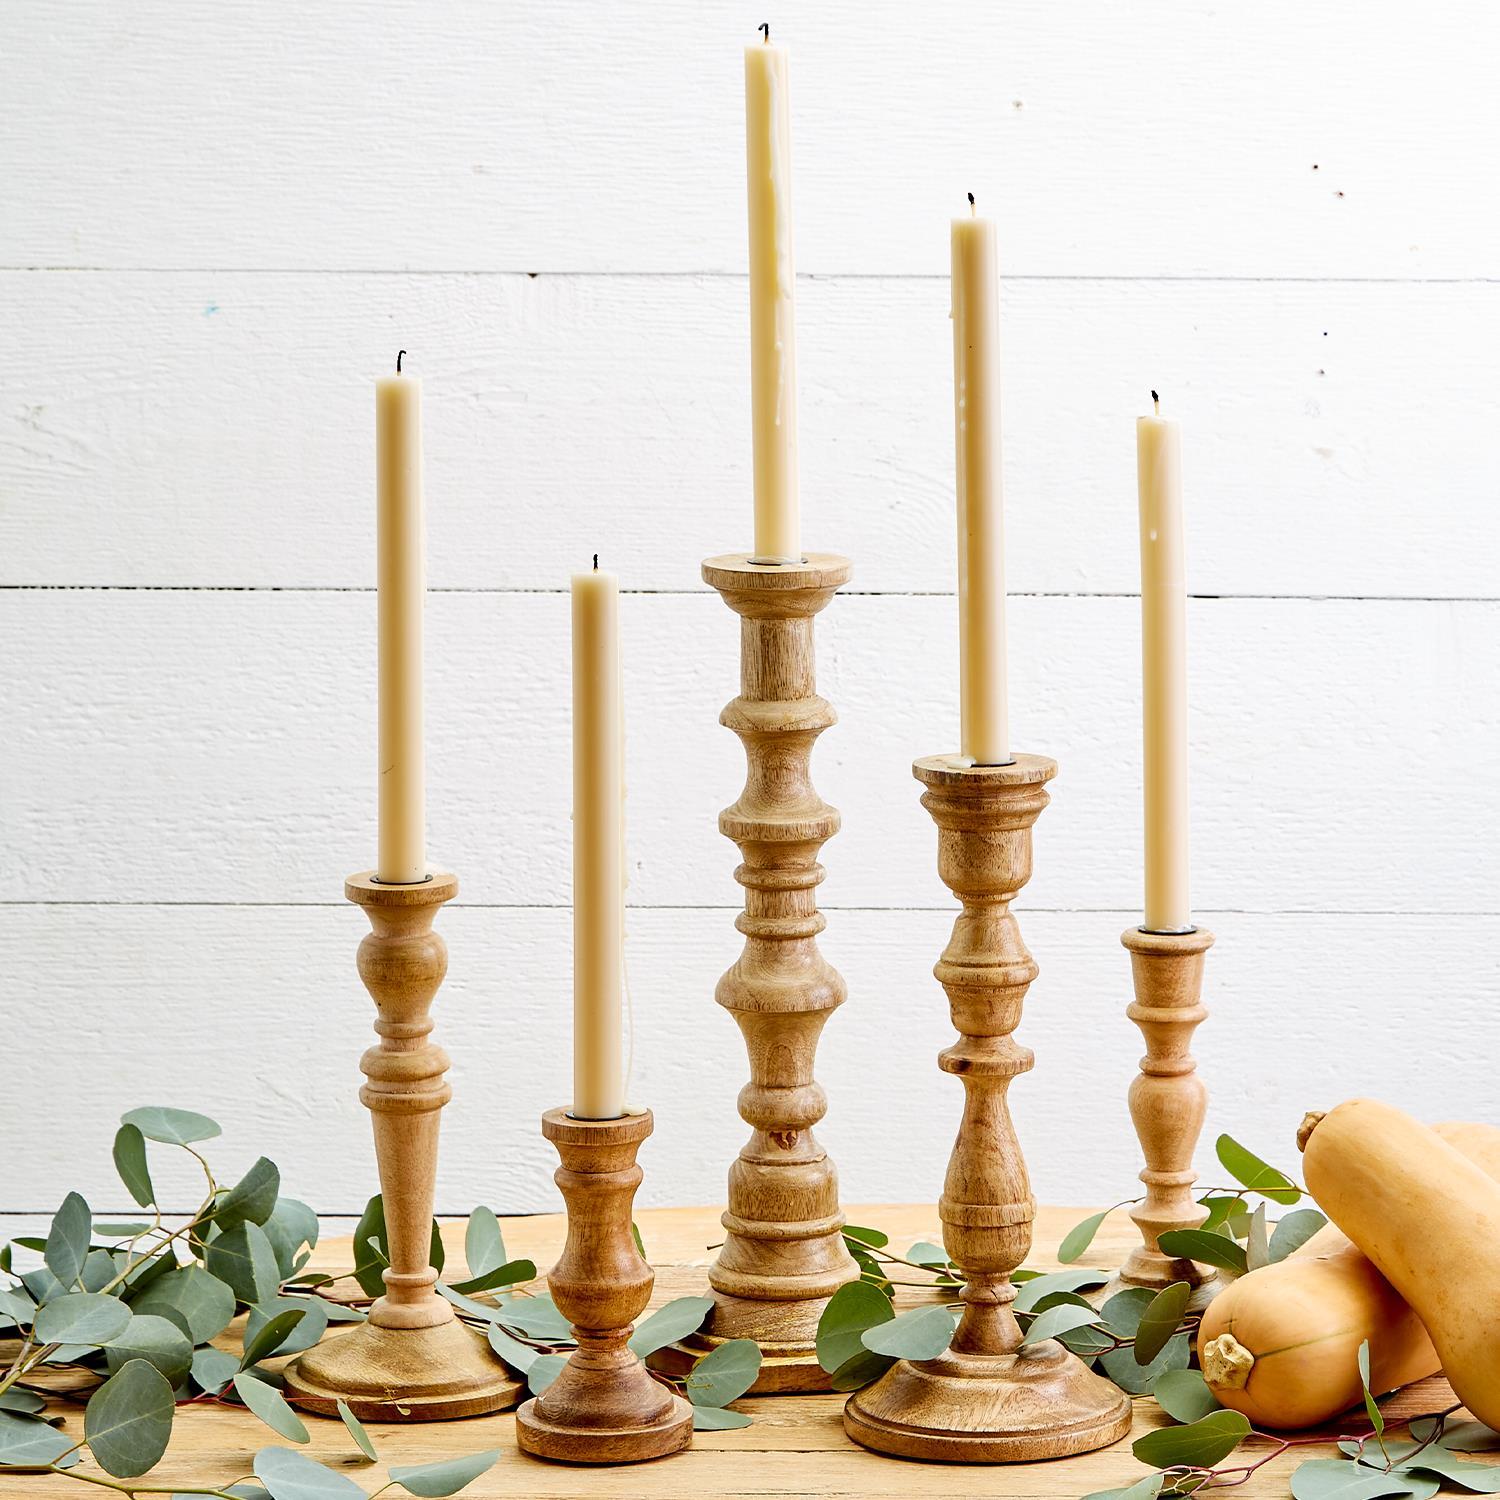 Two's Company S/5 Candlesticks Includes 5 Design/Sizes